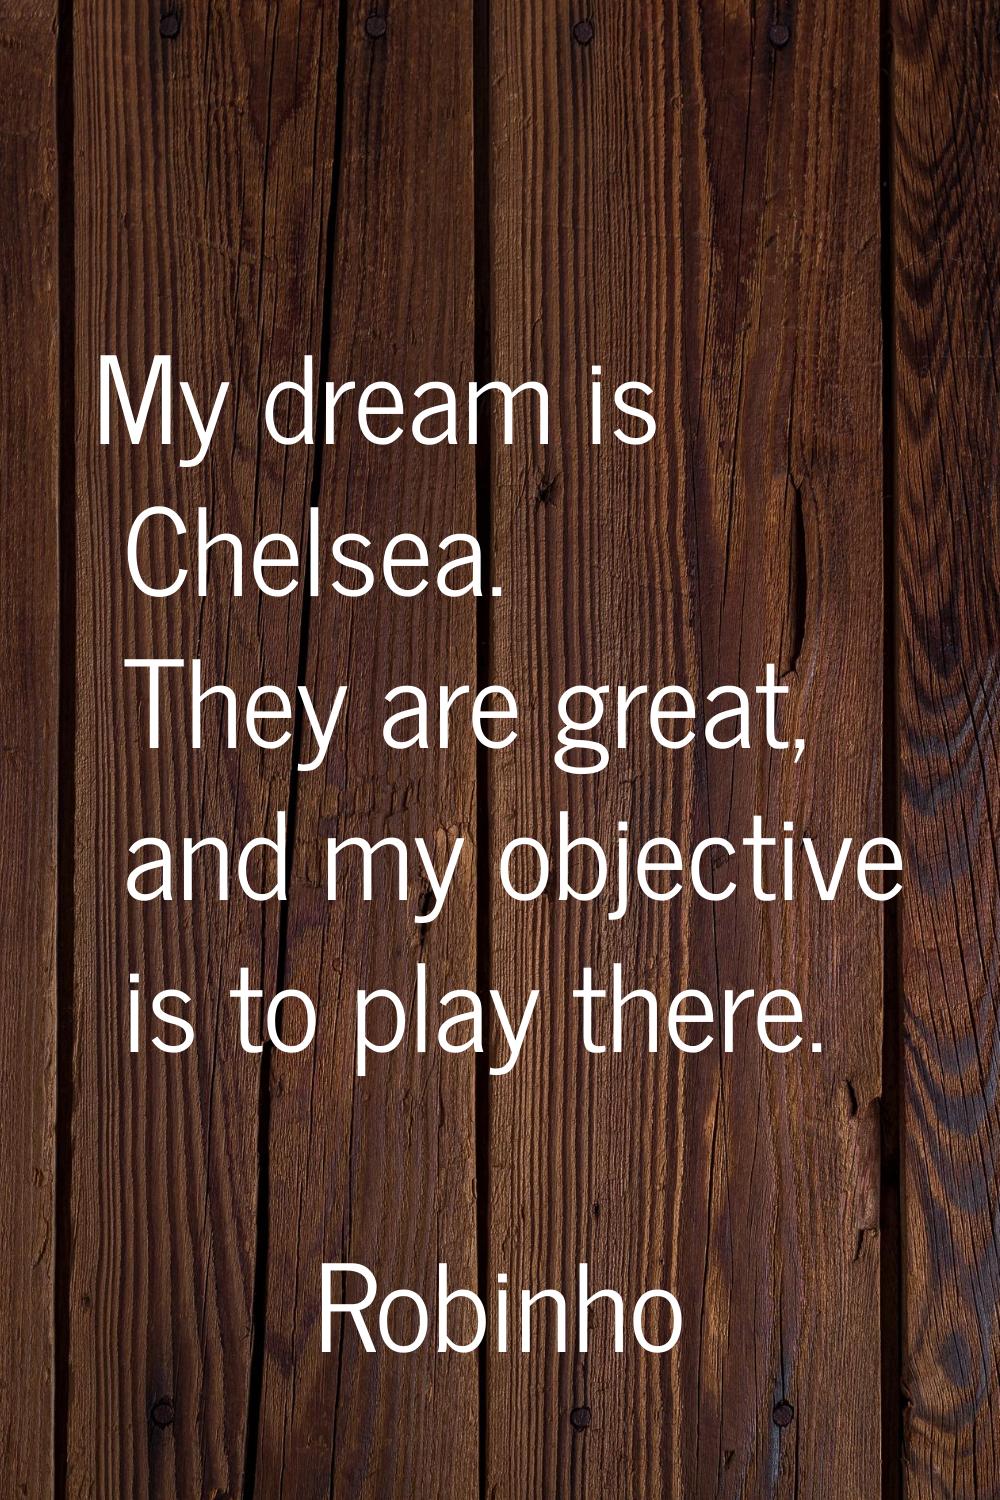 My dream is Chelsea. They are great, and my objective is to play there.